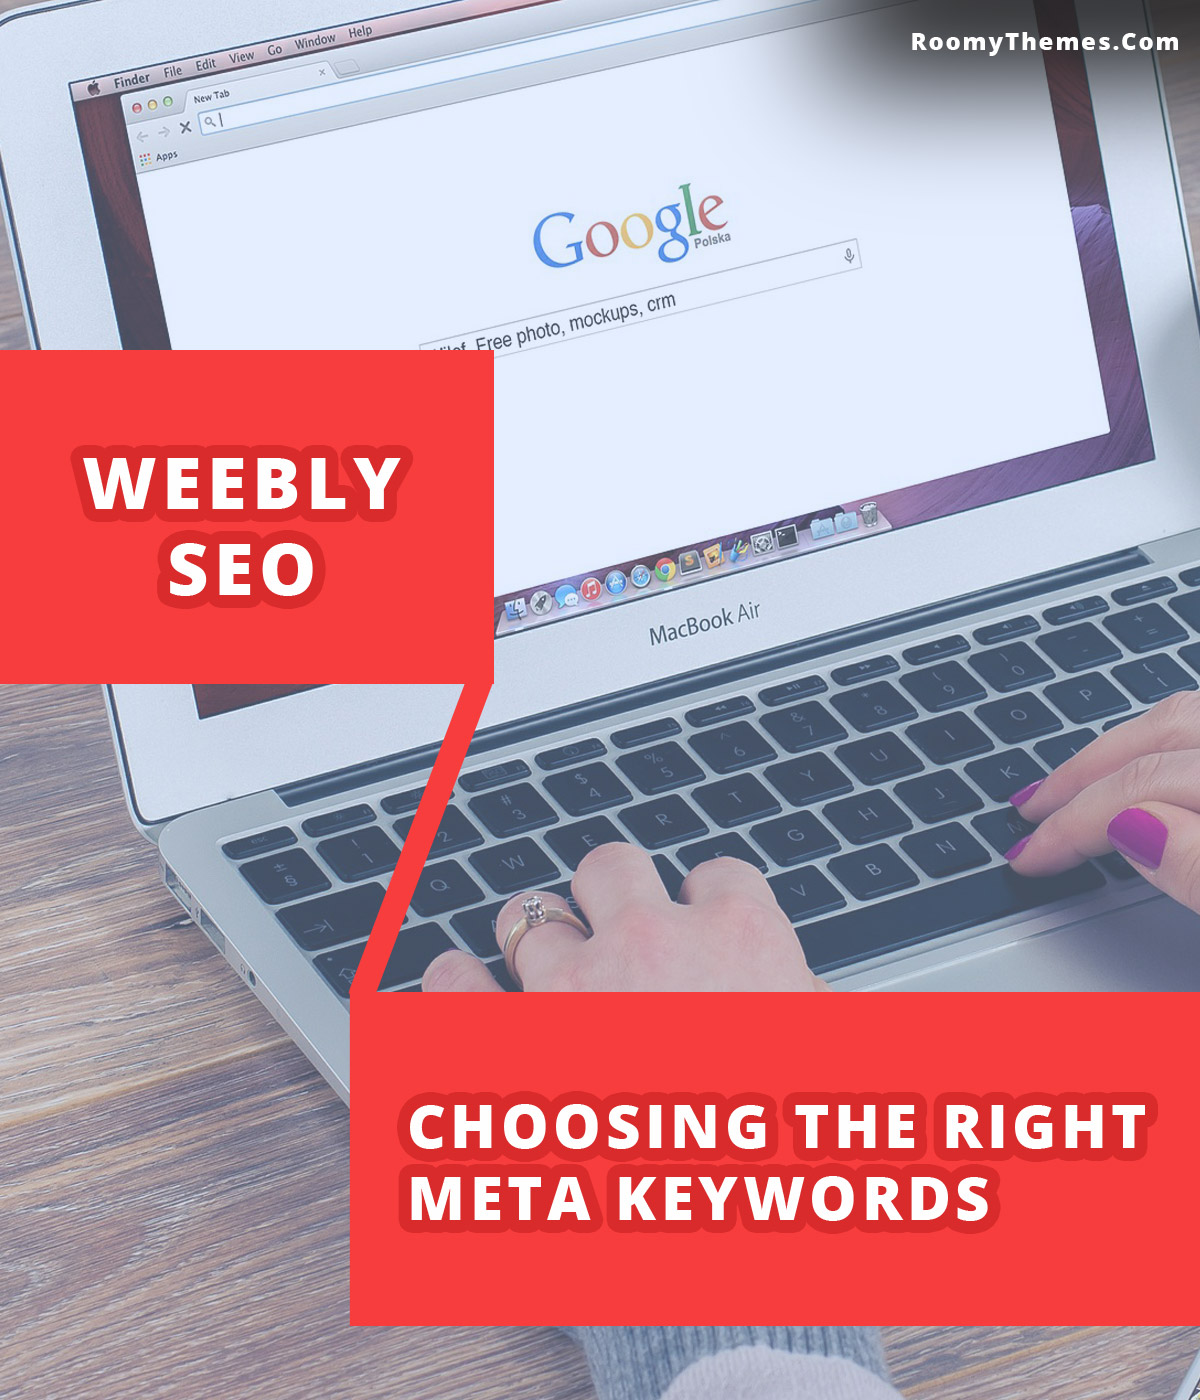 weebly seo - choosing right meta keywords for your website